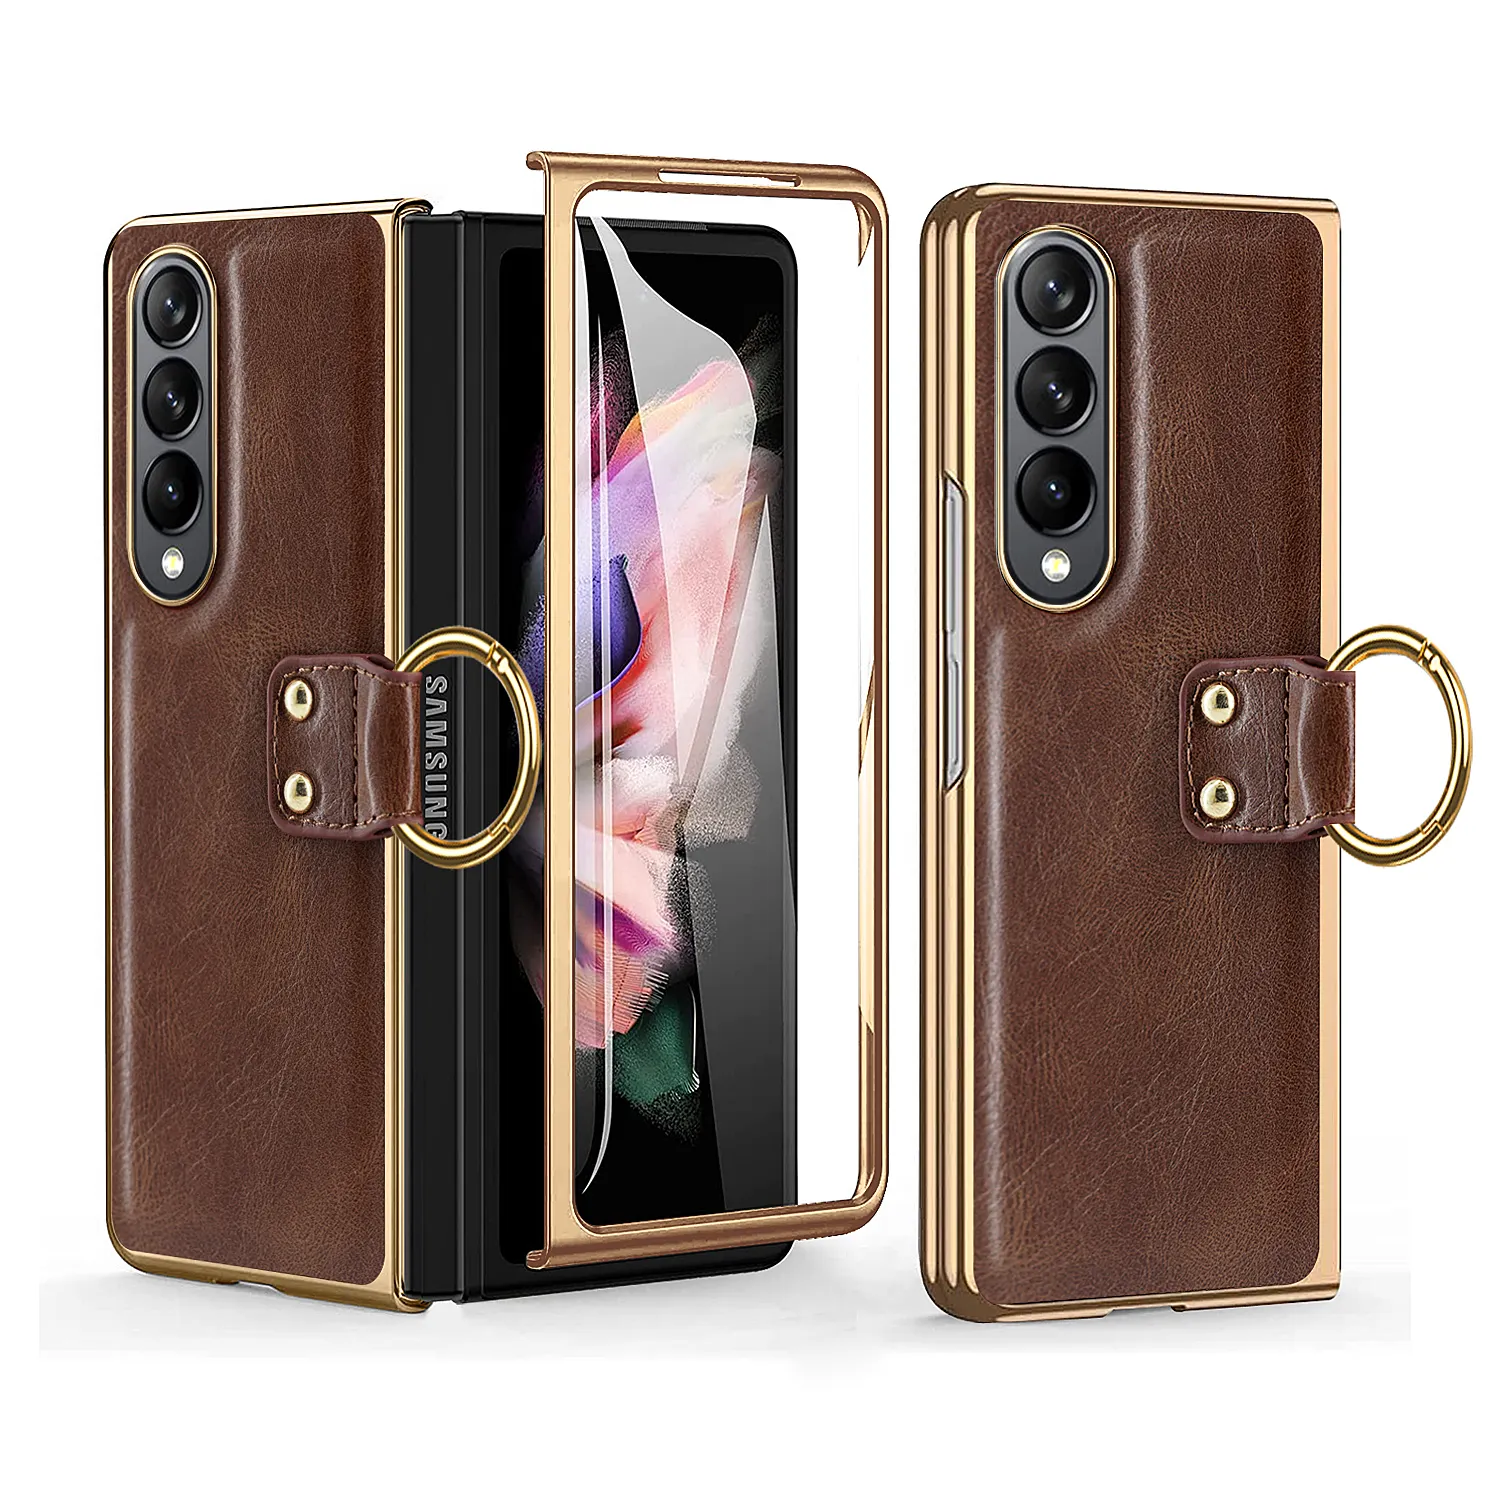 Finger Crazy Horse Ring holder leather cover case for Samsung Galaxy Z Fold 4 3 2 Mobile Phone case